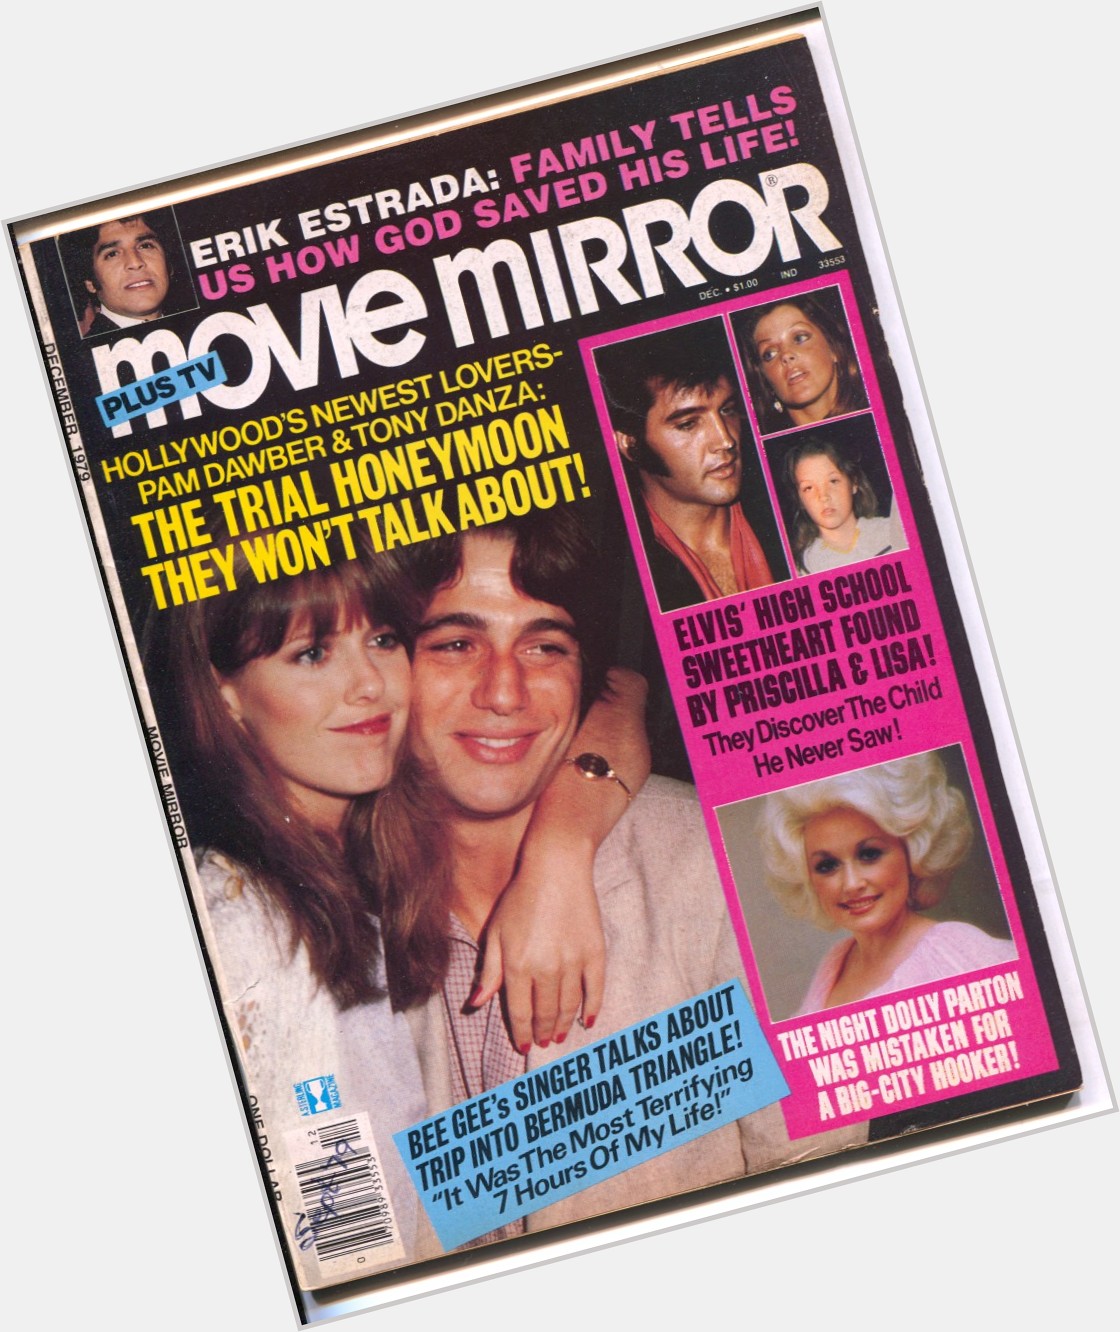 Happy Birthday Pam Dawber! I have found this old magazine with a pic from her and Tony !  